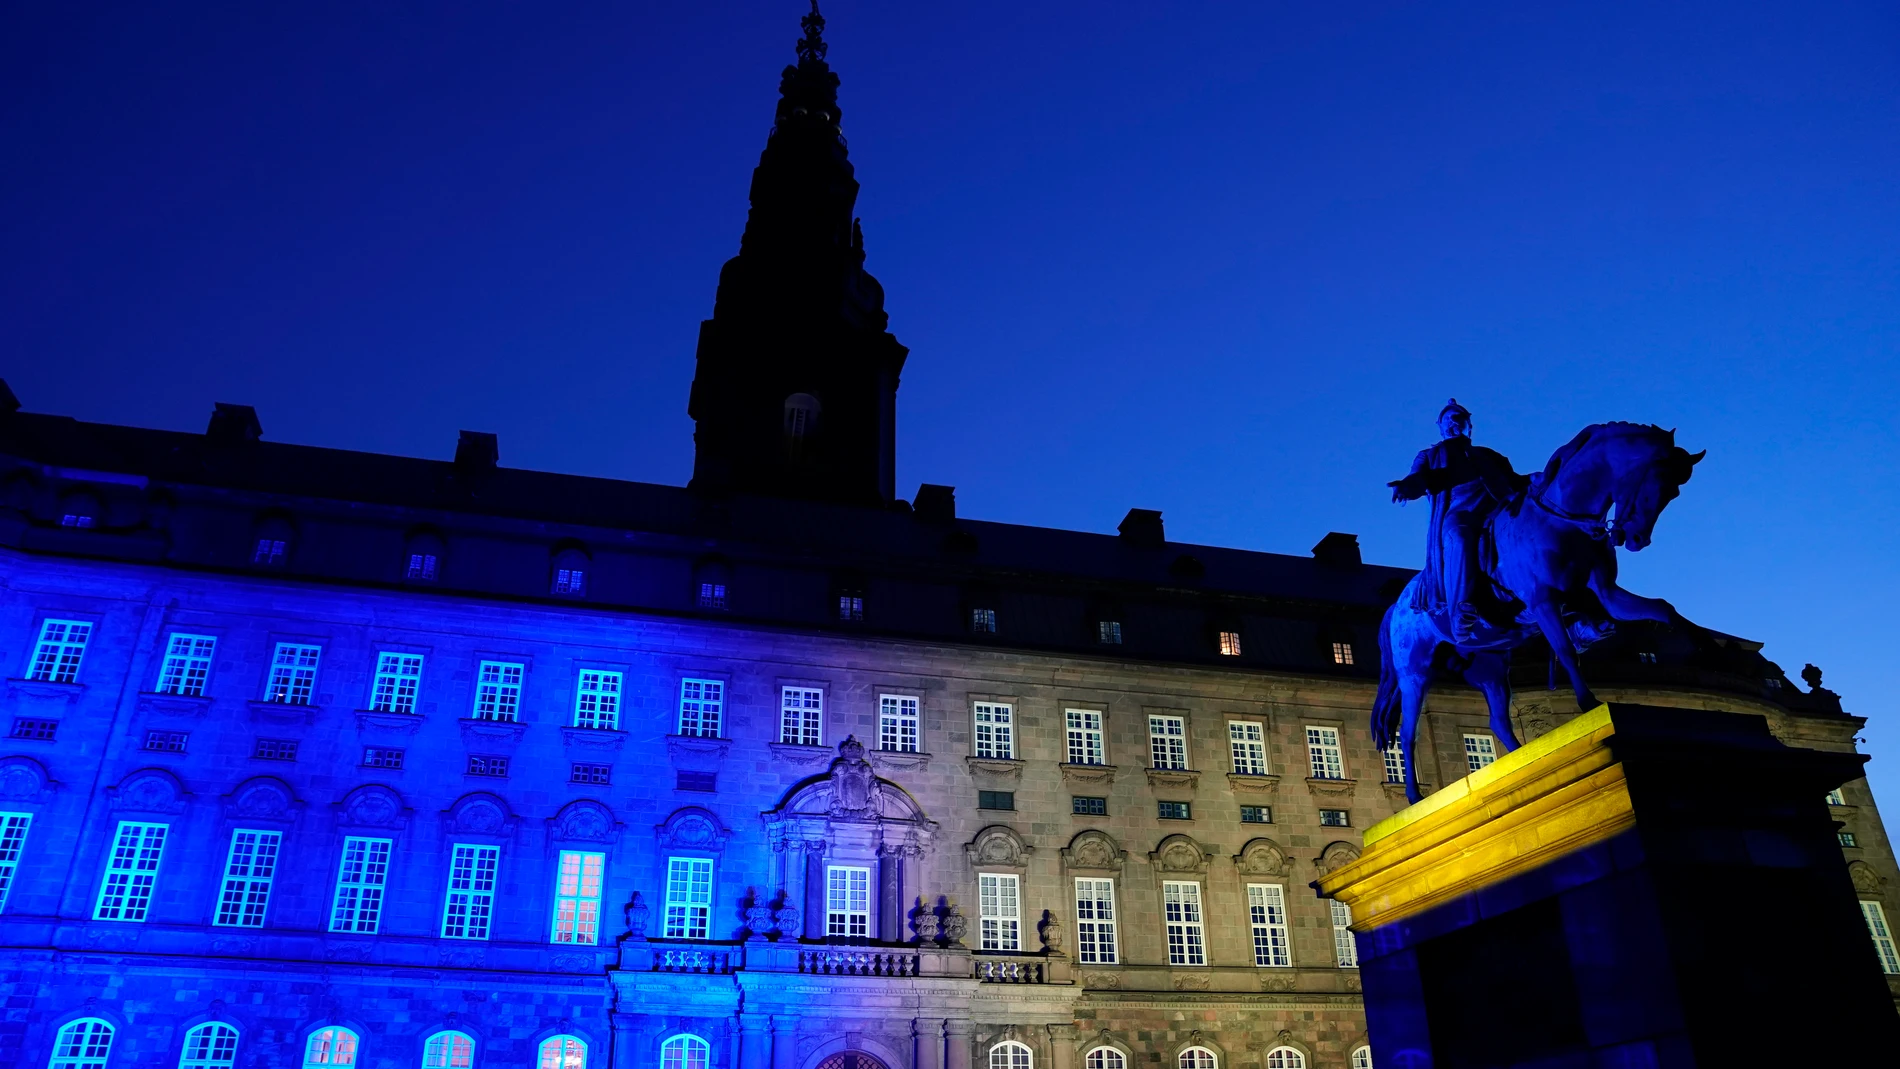 Copenhagen (Denmark), 09/05/2022.- The blue and yellow national colors of Ukraine illuminate the facade of The Danish Parliament, Christiansborg Castle, in Copenhagen, Denmark, 09 May 2022, on the occasion of Europe Day. Europe Day, observed annually on 09 May, marks the unity of the European continent and the anniversary of the historic 'Schuman Declaration,' considered to be the founding moment of today's European Union. (Abierto, Dinamarca, Rusia, Ucrania, Copenhague) EFE/EPA/Liselotte Sabroe DENMARK OUT